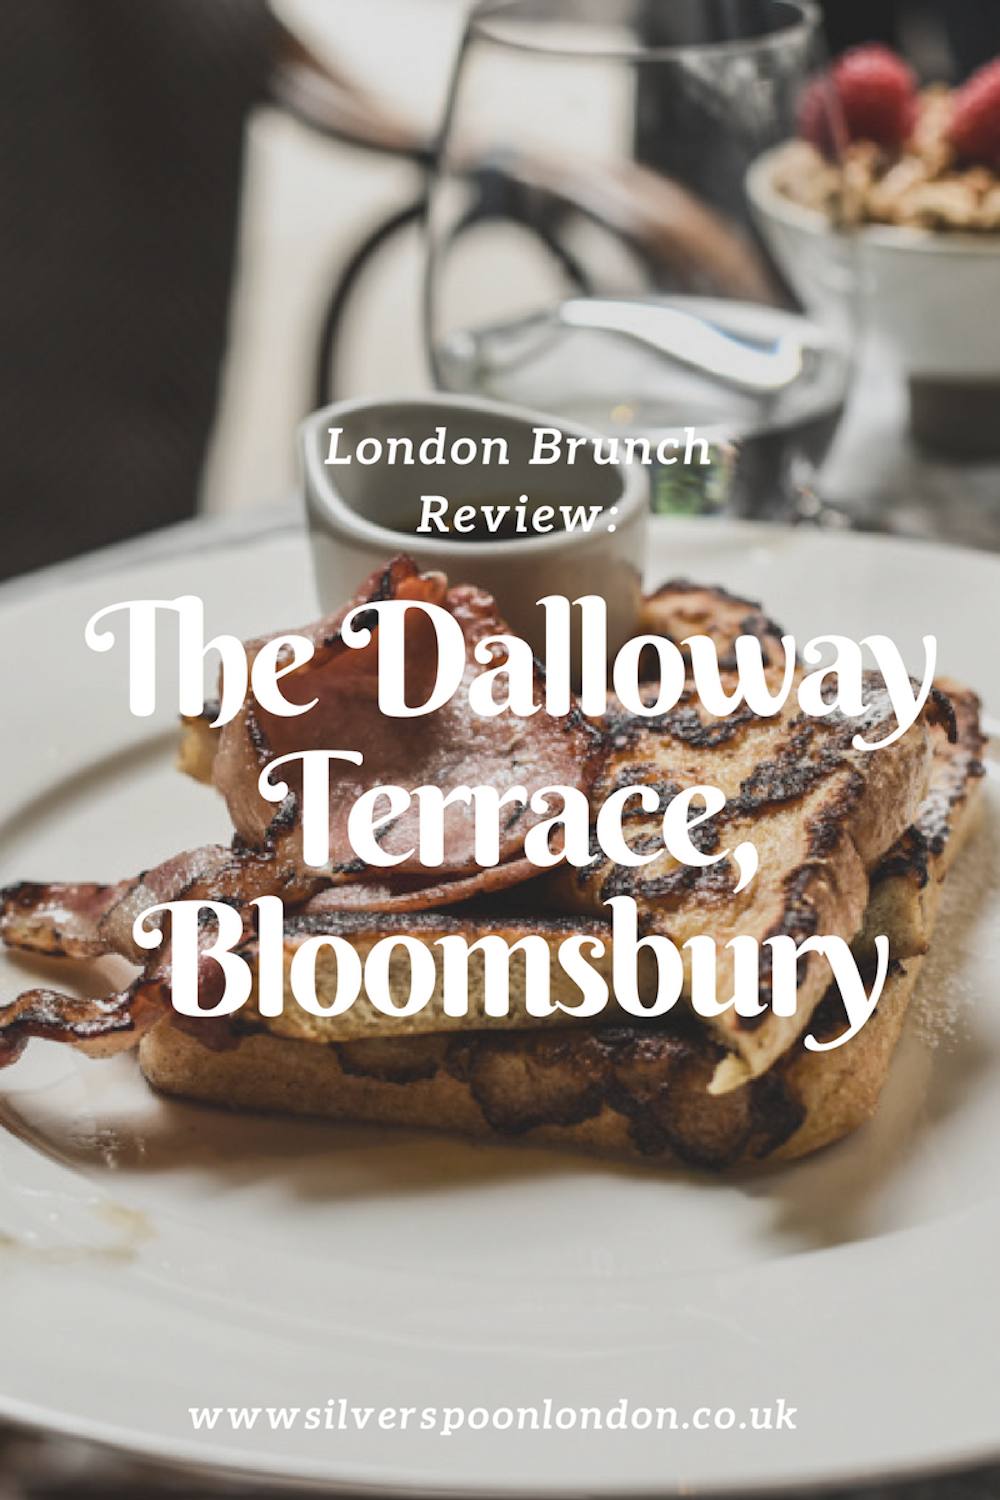 London Brunch Review: The Dalloway Terrace